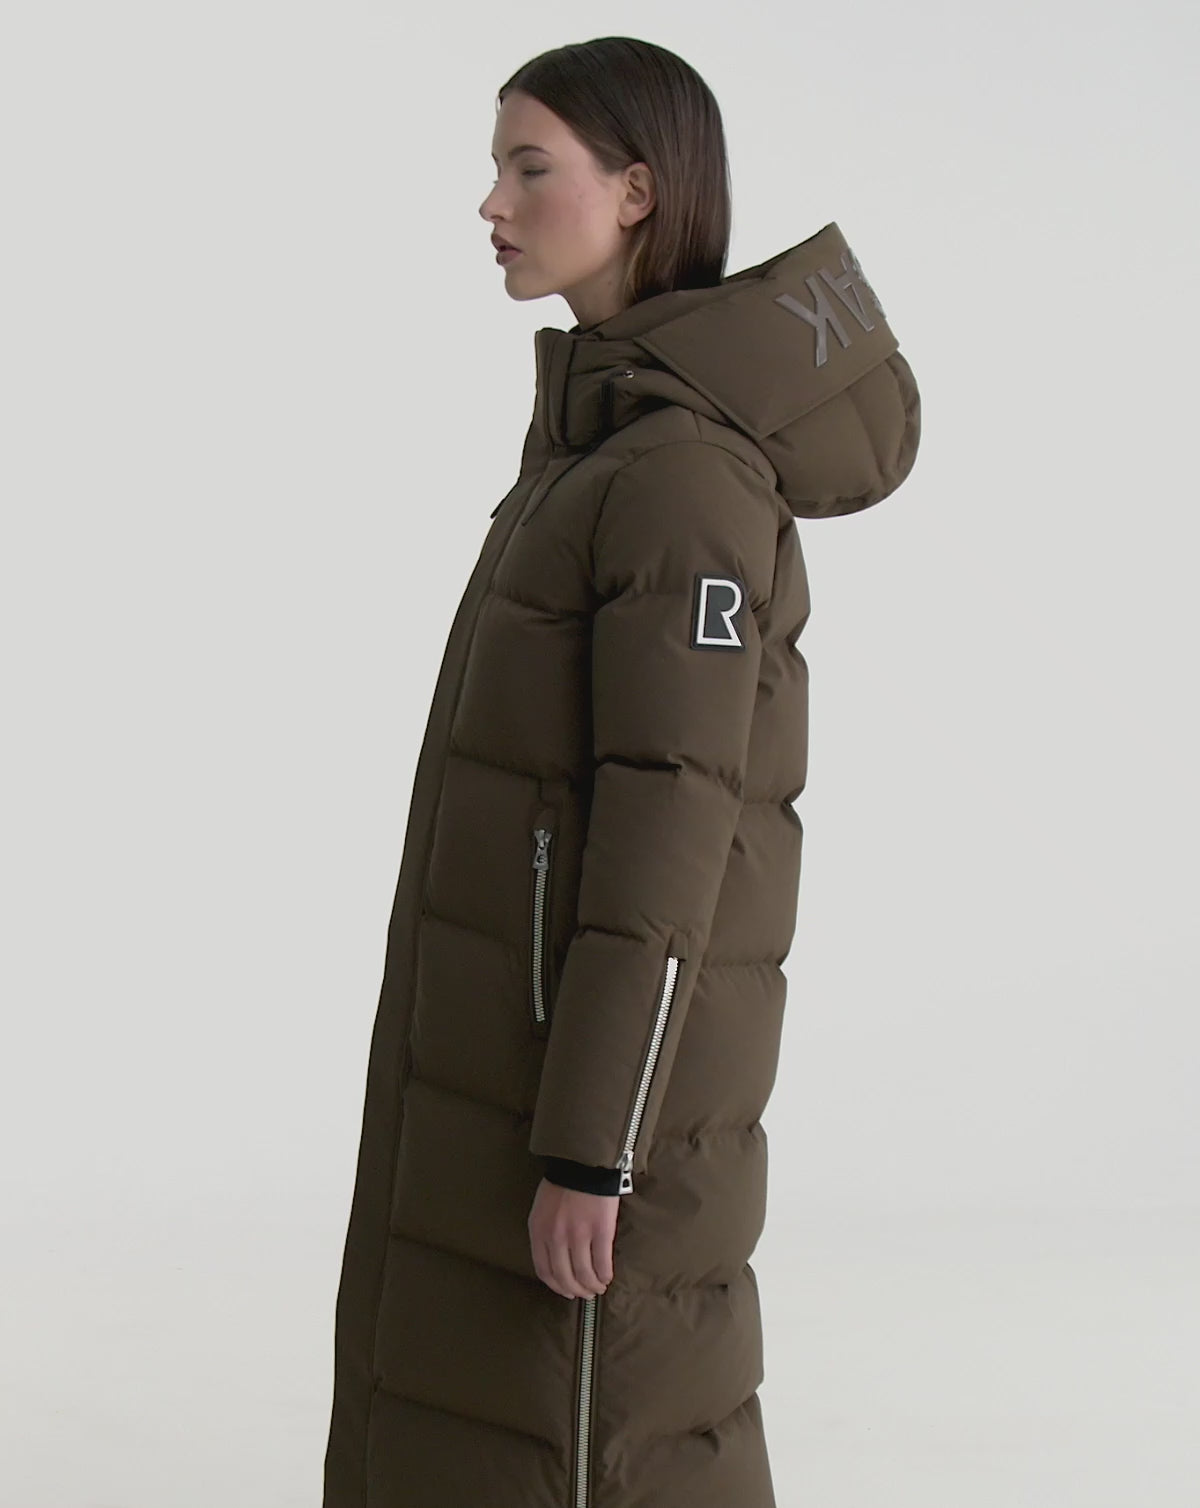 DKNY Women's Cold Weather Outerwear Puffer